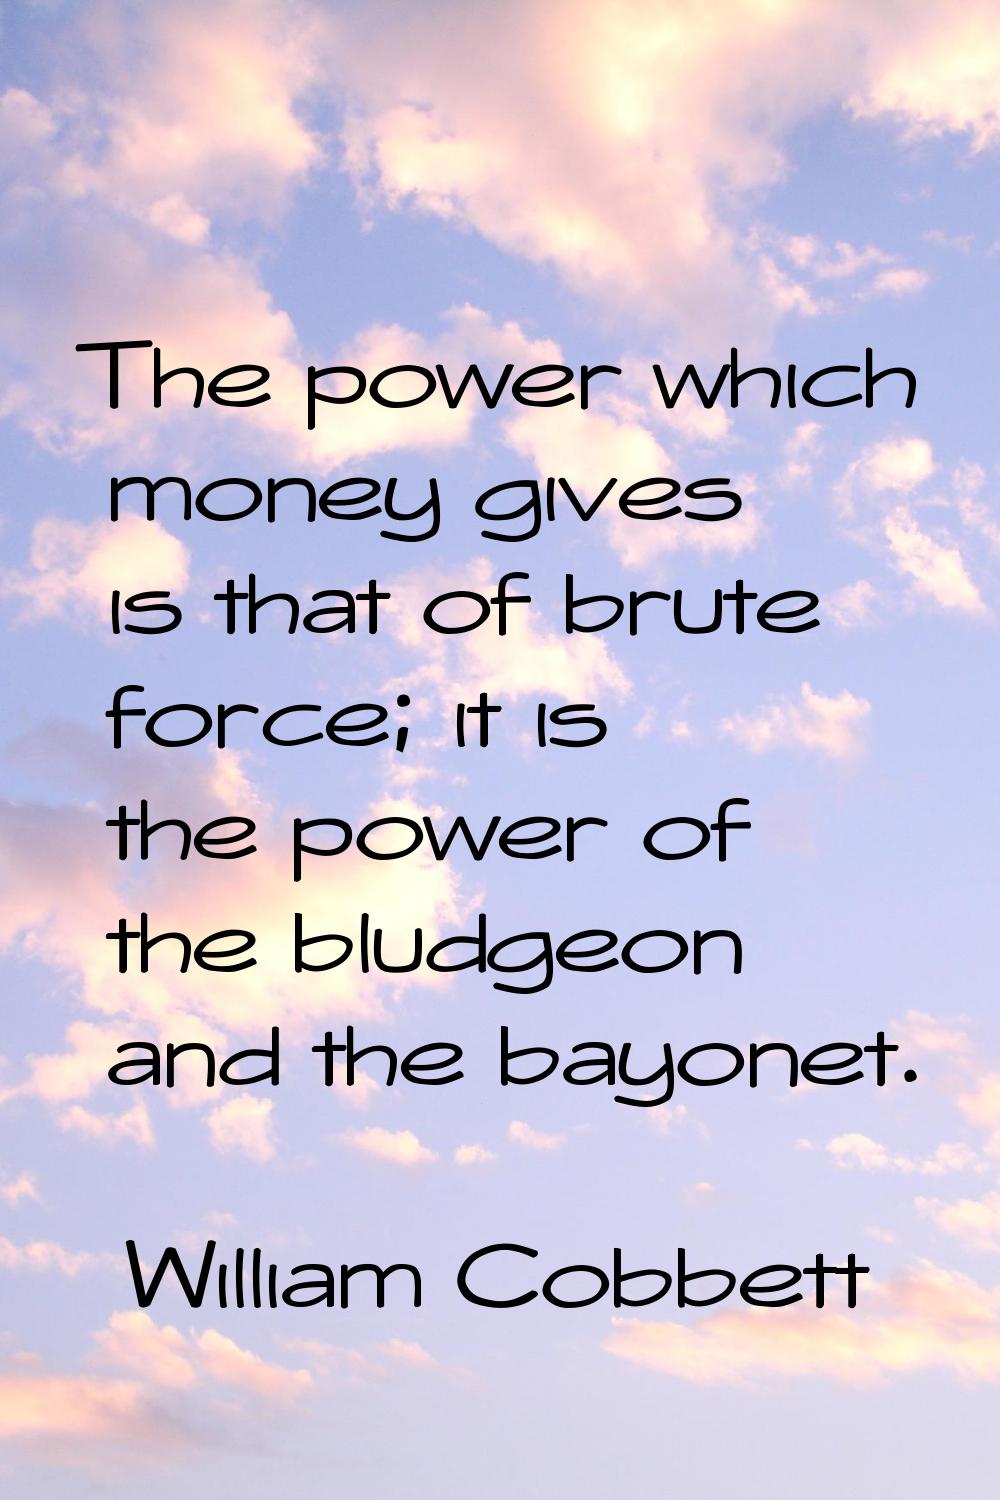 The power which money gives is that of brute force; it is the power of the bludgeon and the bayonet